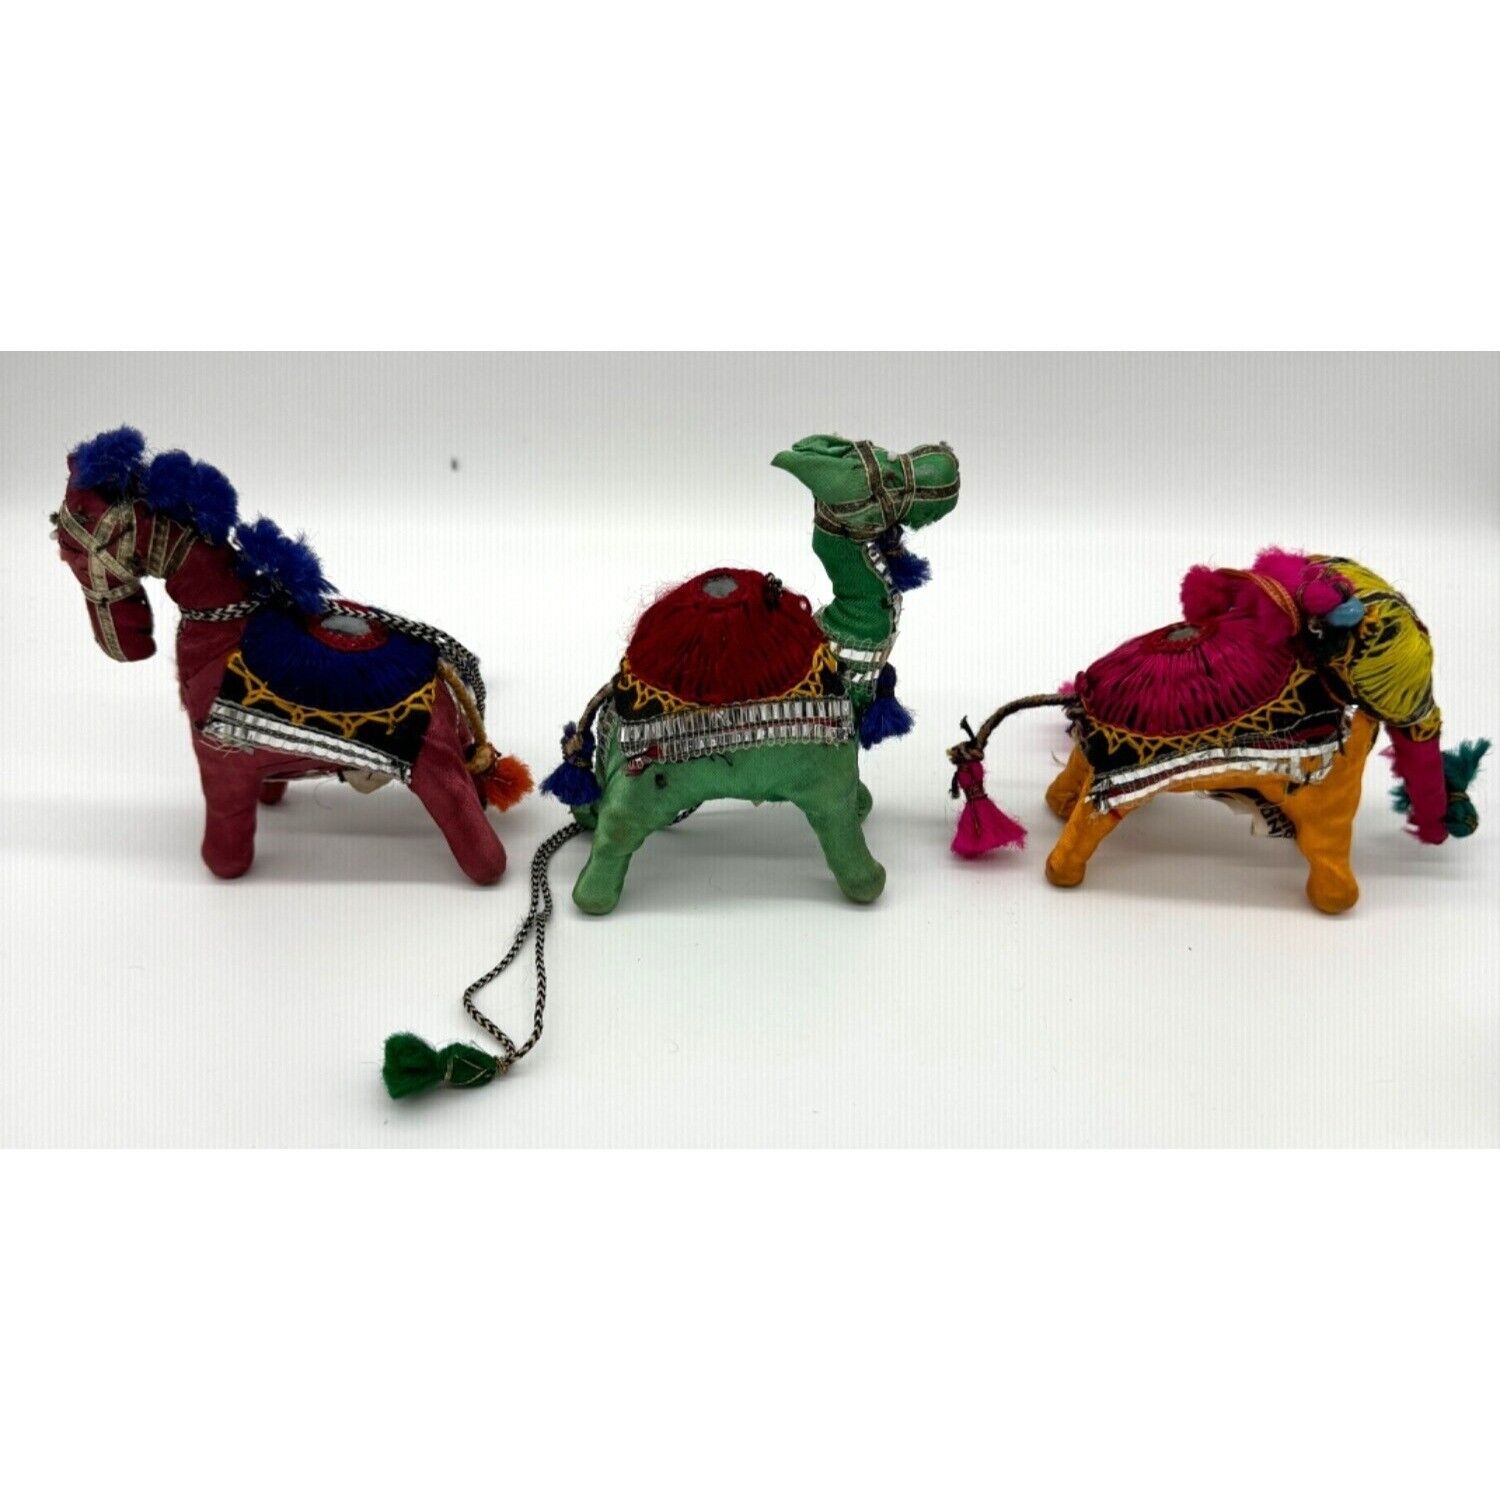 Vtg Anglo Raj Elephant Camel Horse Ornament Set w/ Mirror & Beads Made in India